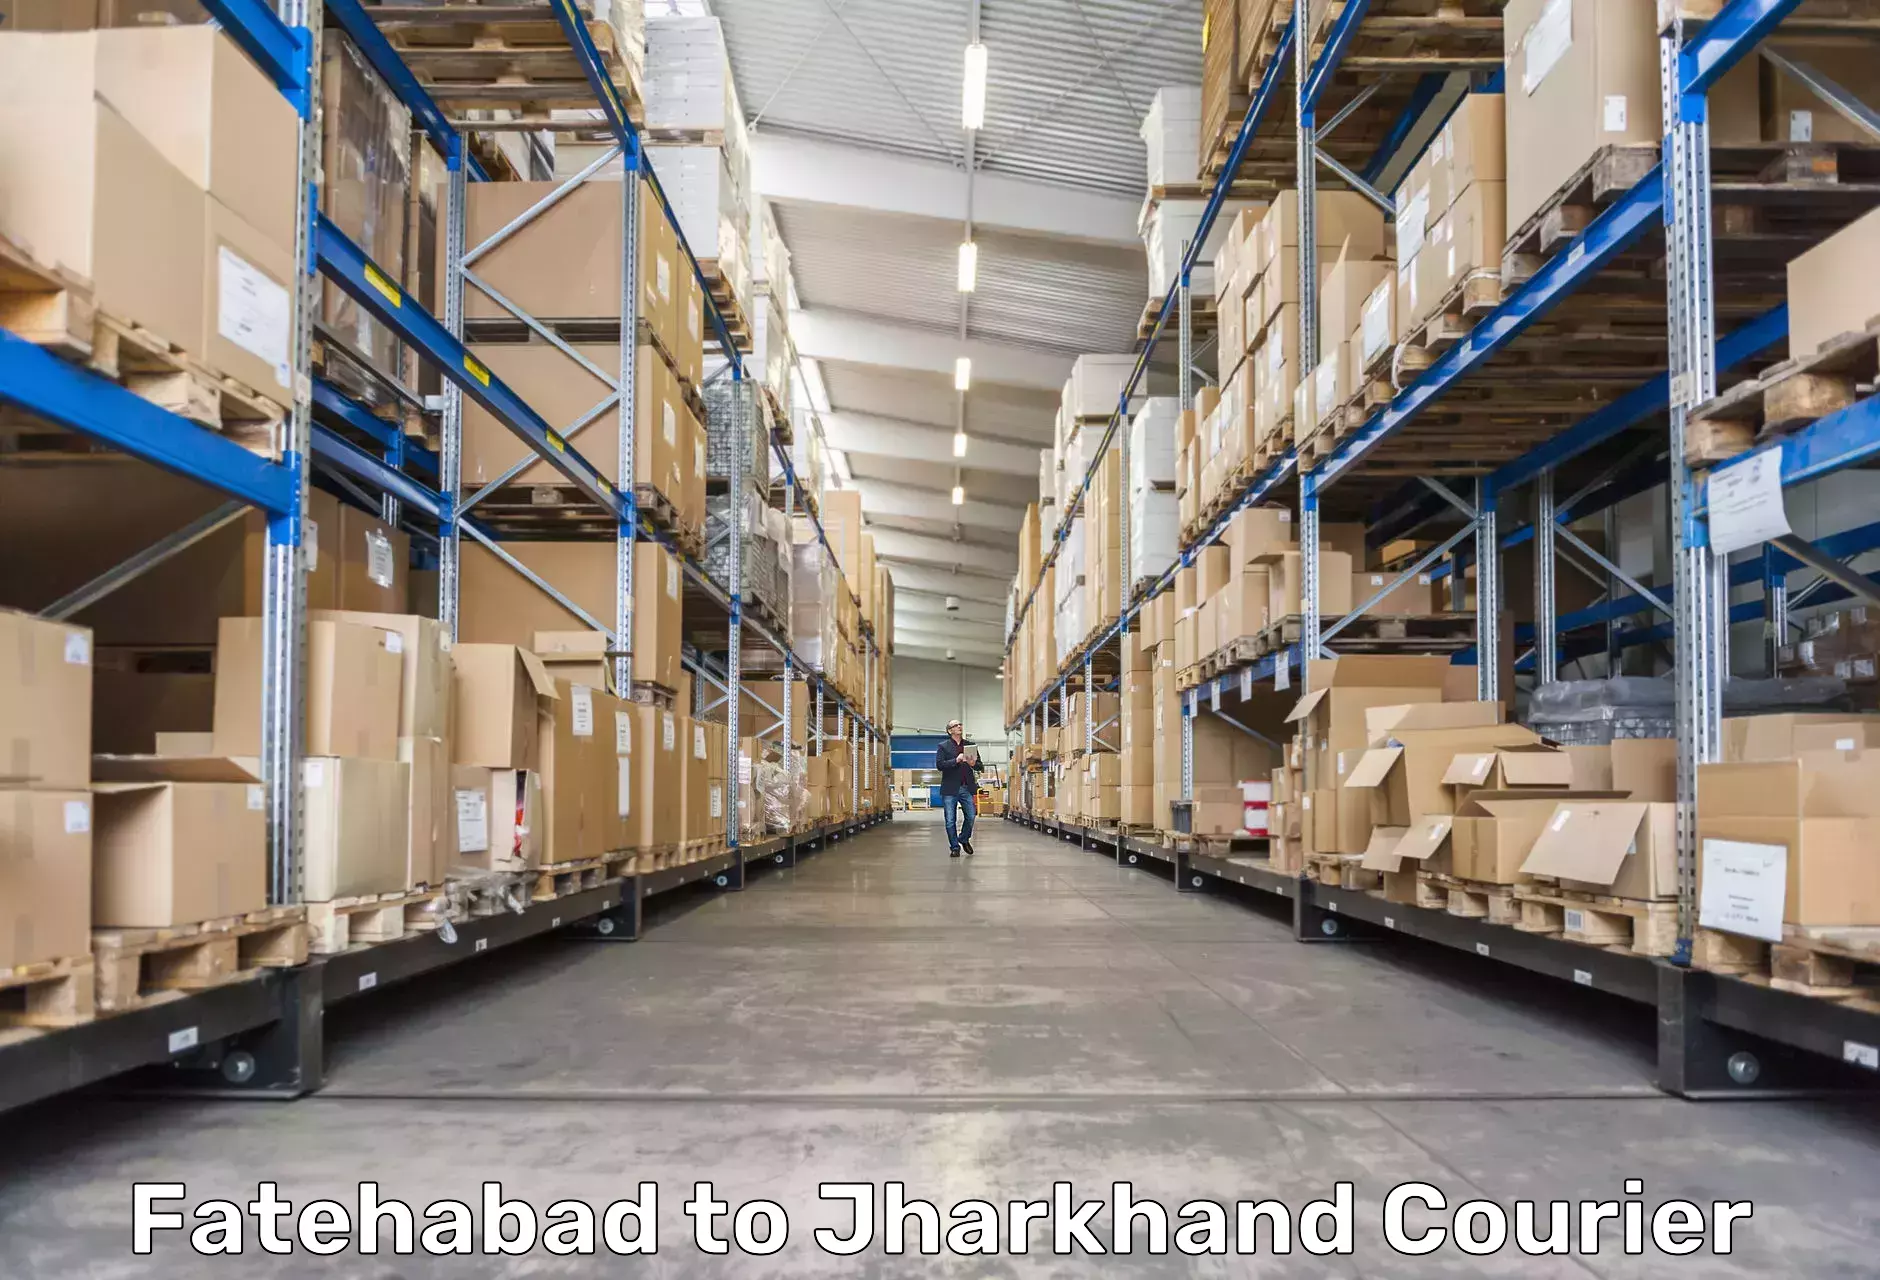 State-of-the-art courier technology Fatehabad to Bagodar